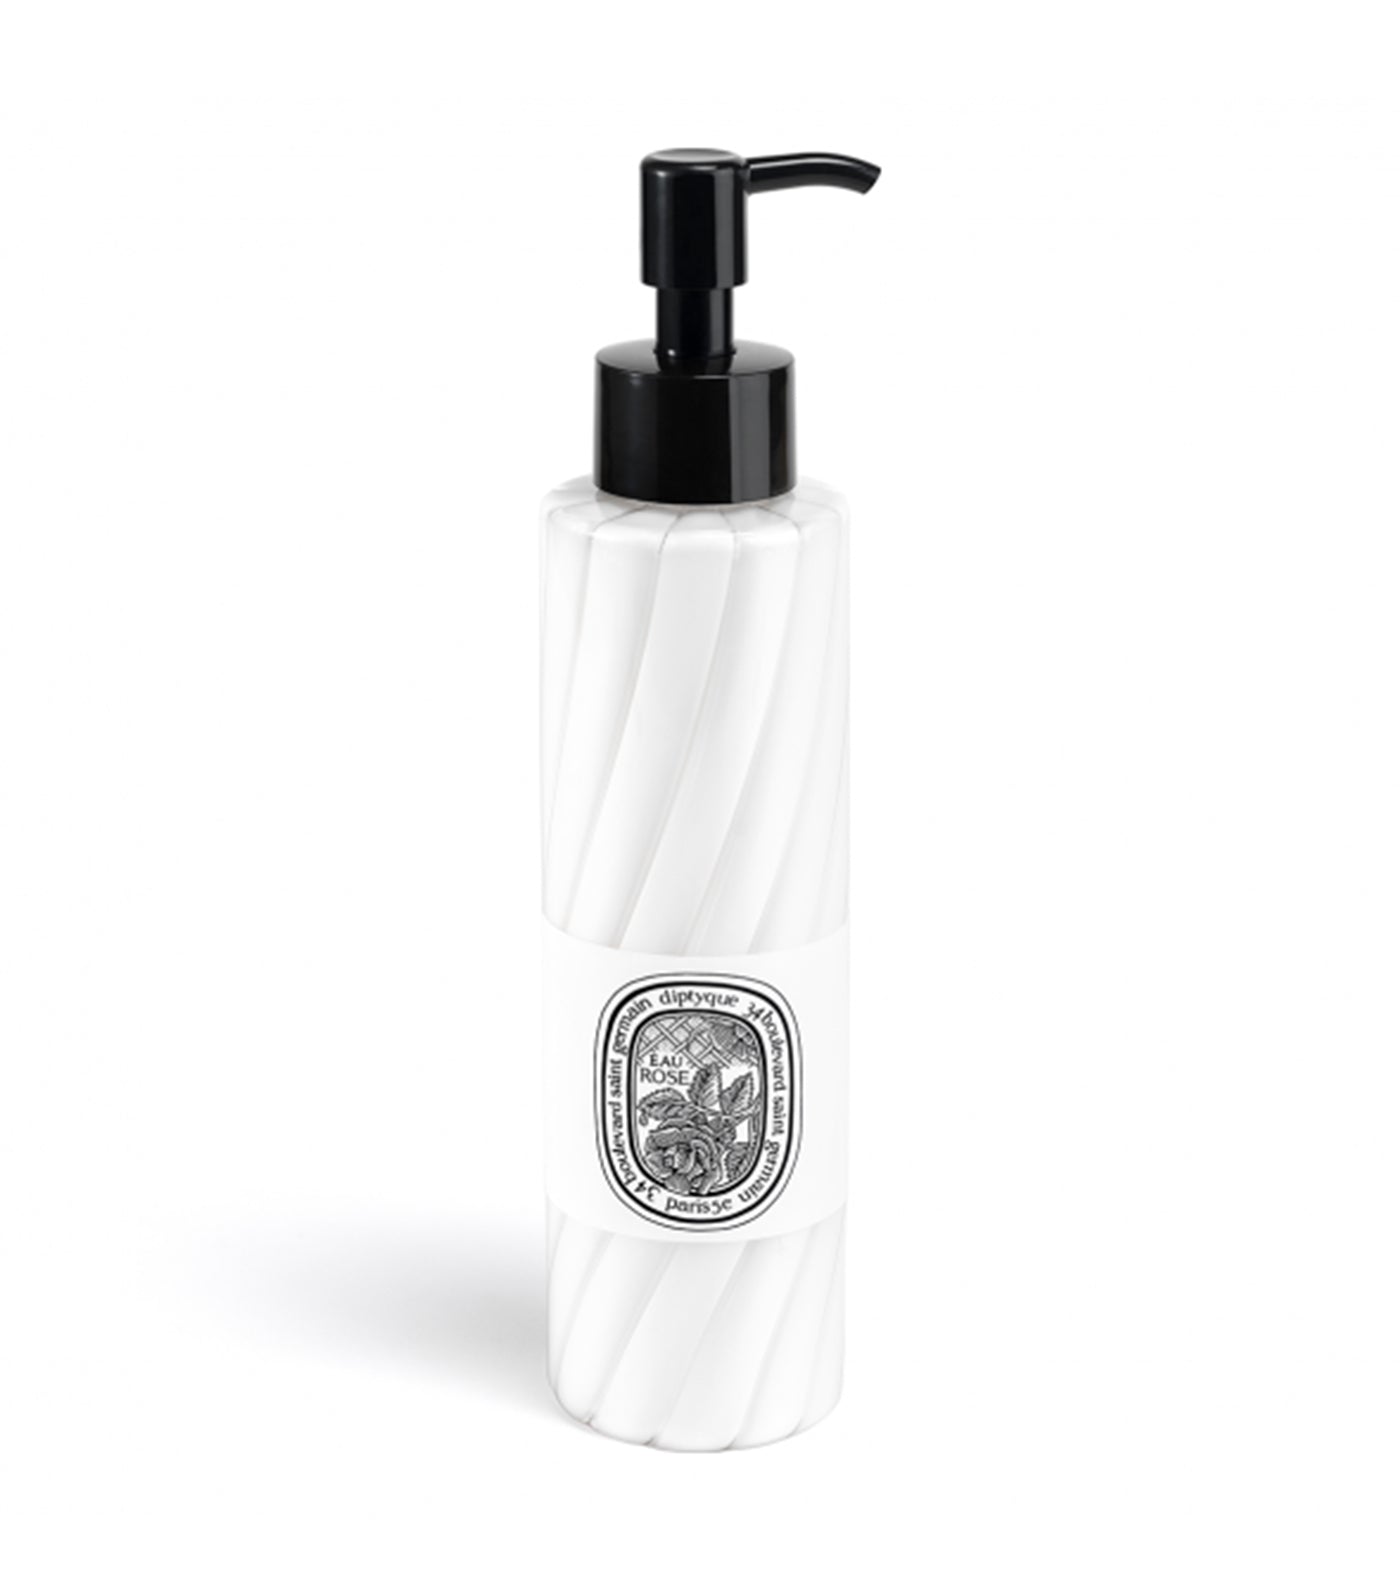 diptyque eau rose hand and body lotion